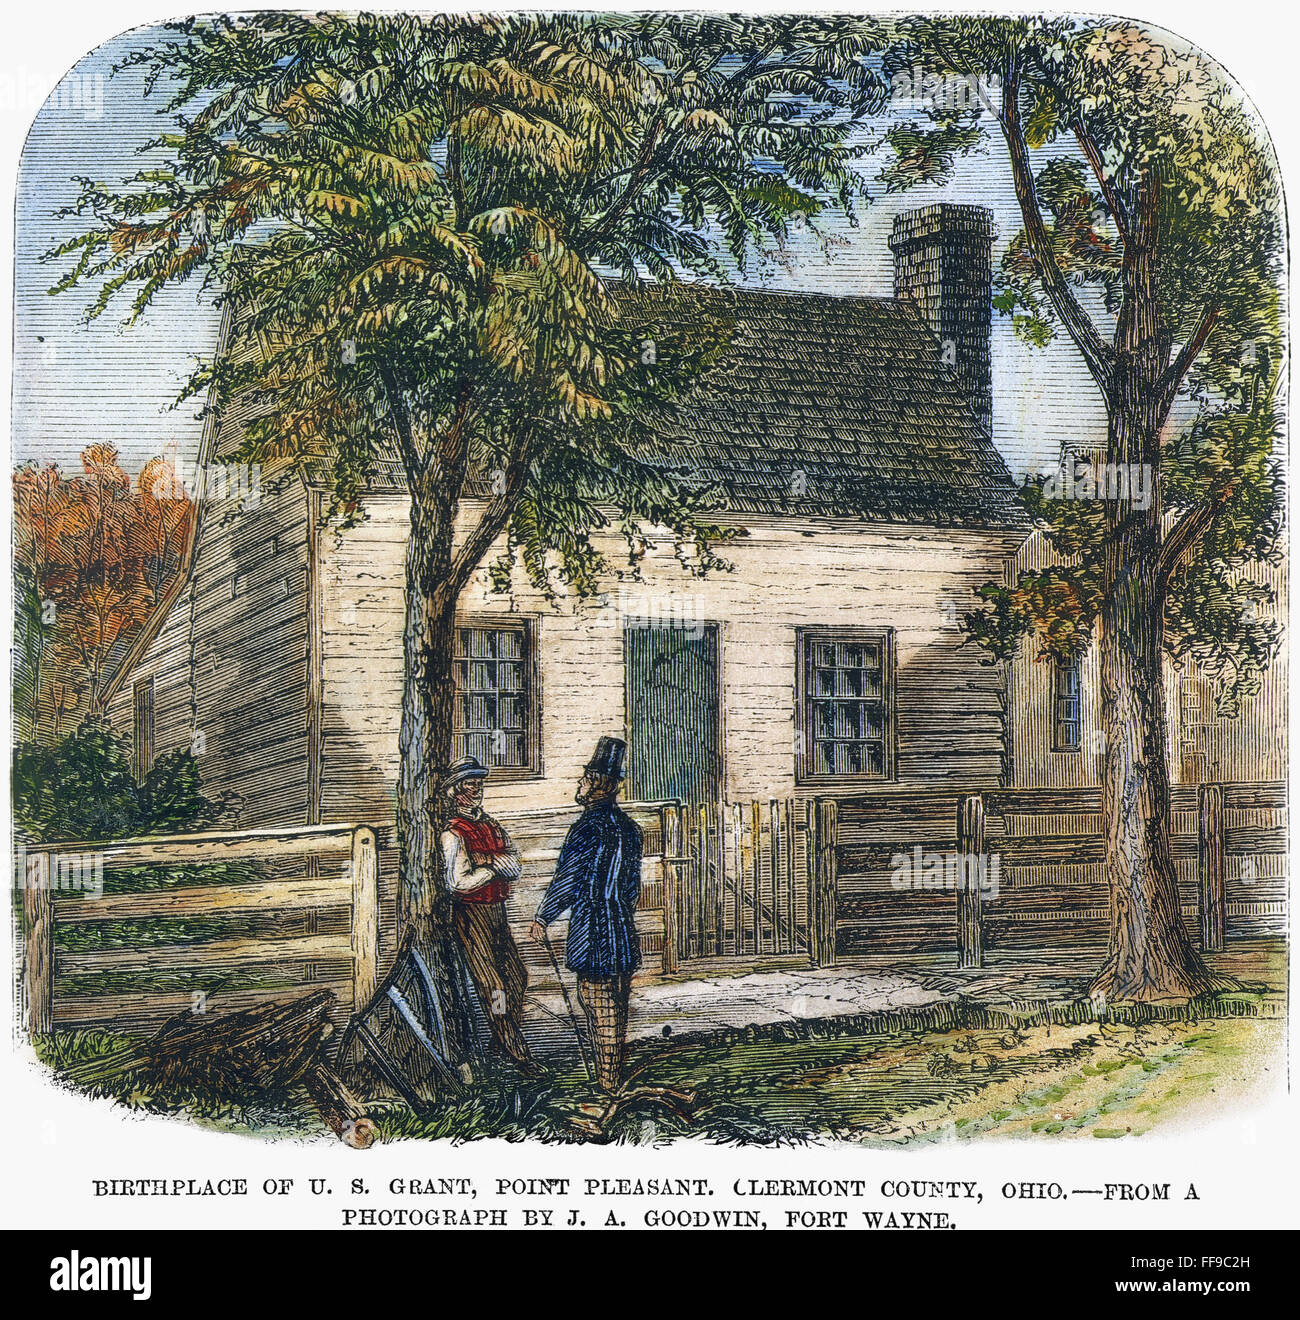 U.S. GRANT: BIRTHPLACE. /nThe farm house at Point Pleasant, Ohio, where the future President Ulysses S. Grant was born on 27 April 1822. Colored engraving, 19th century. Stock Photo